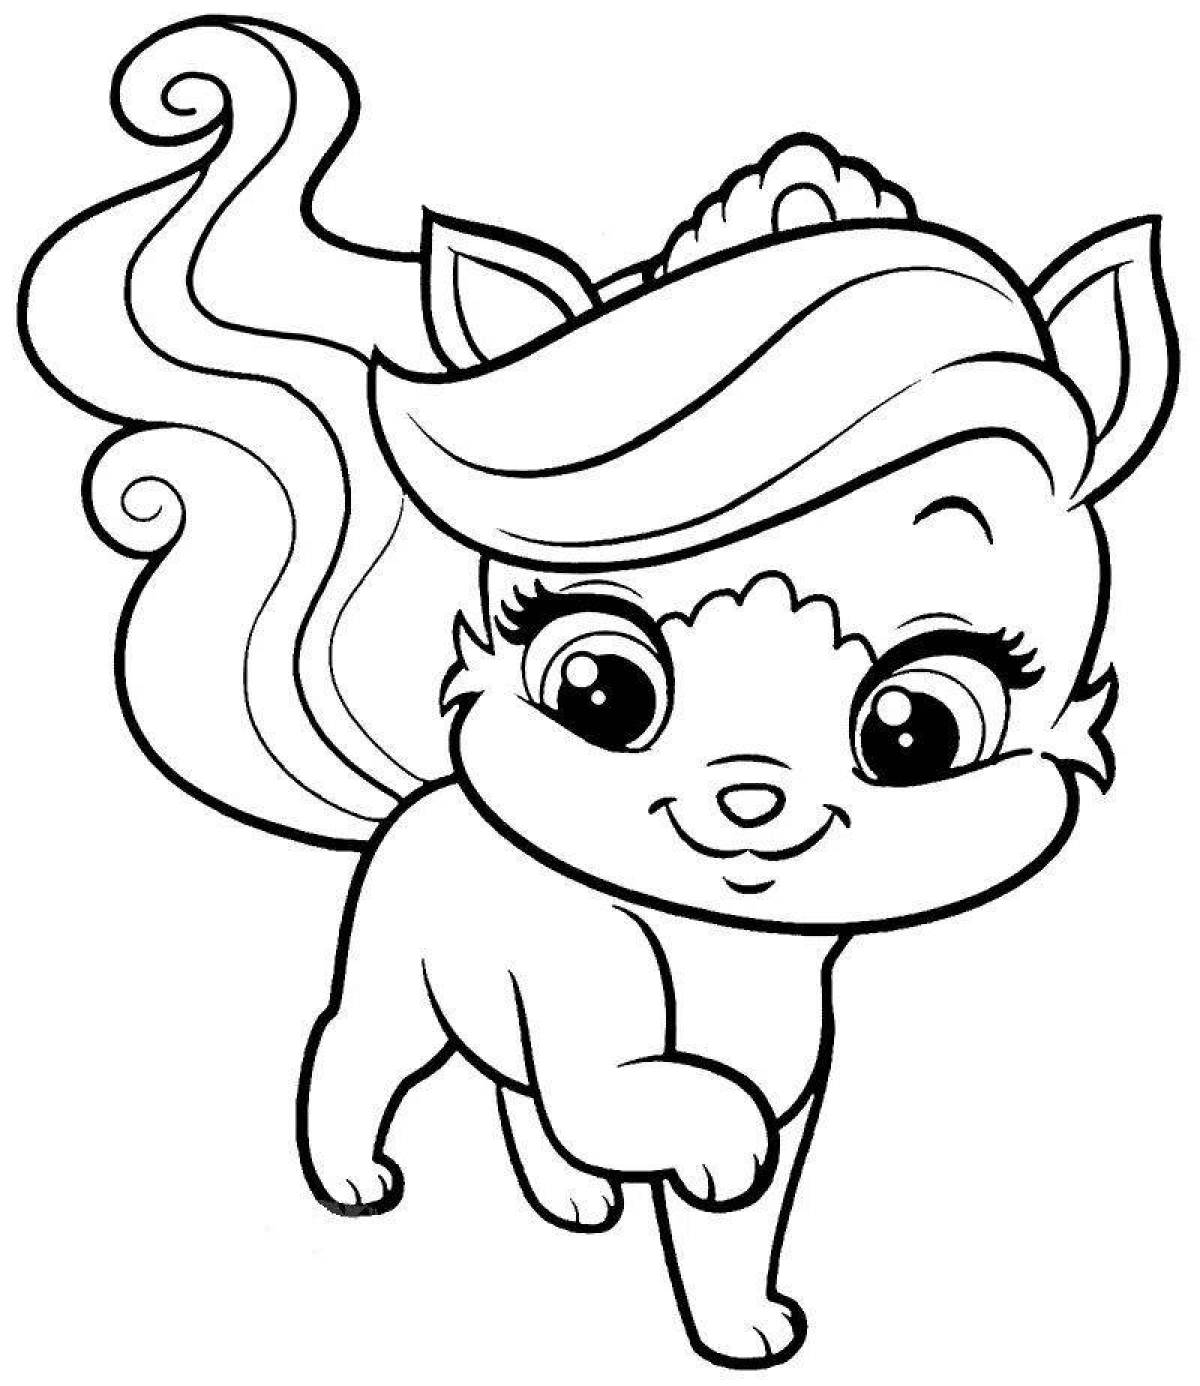 Snuggly furry friends coloring page